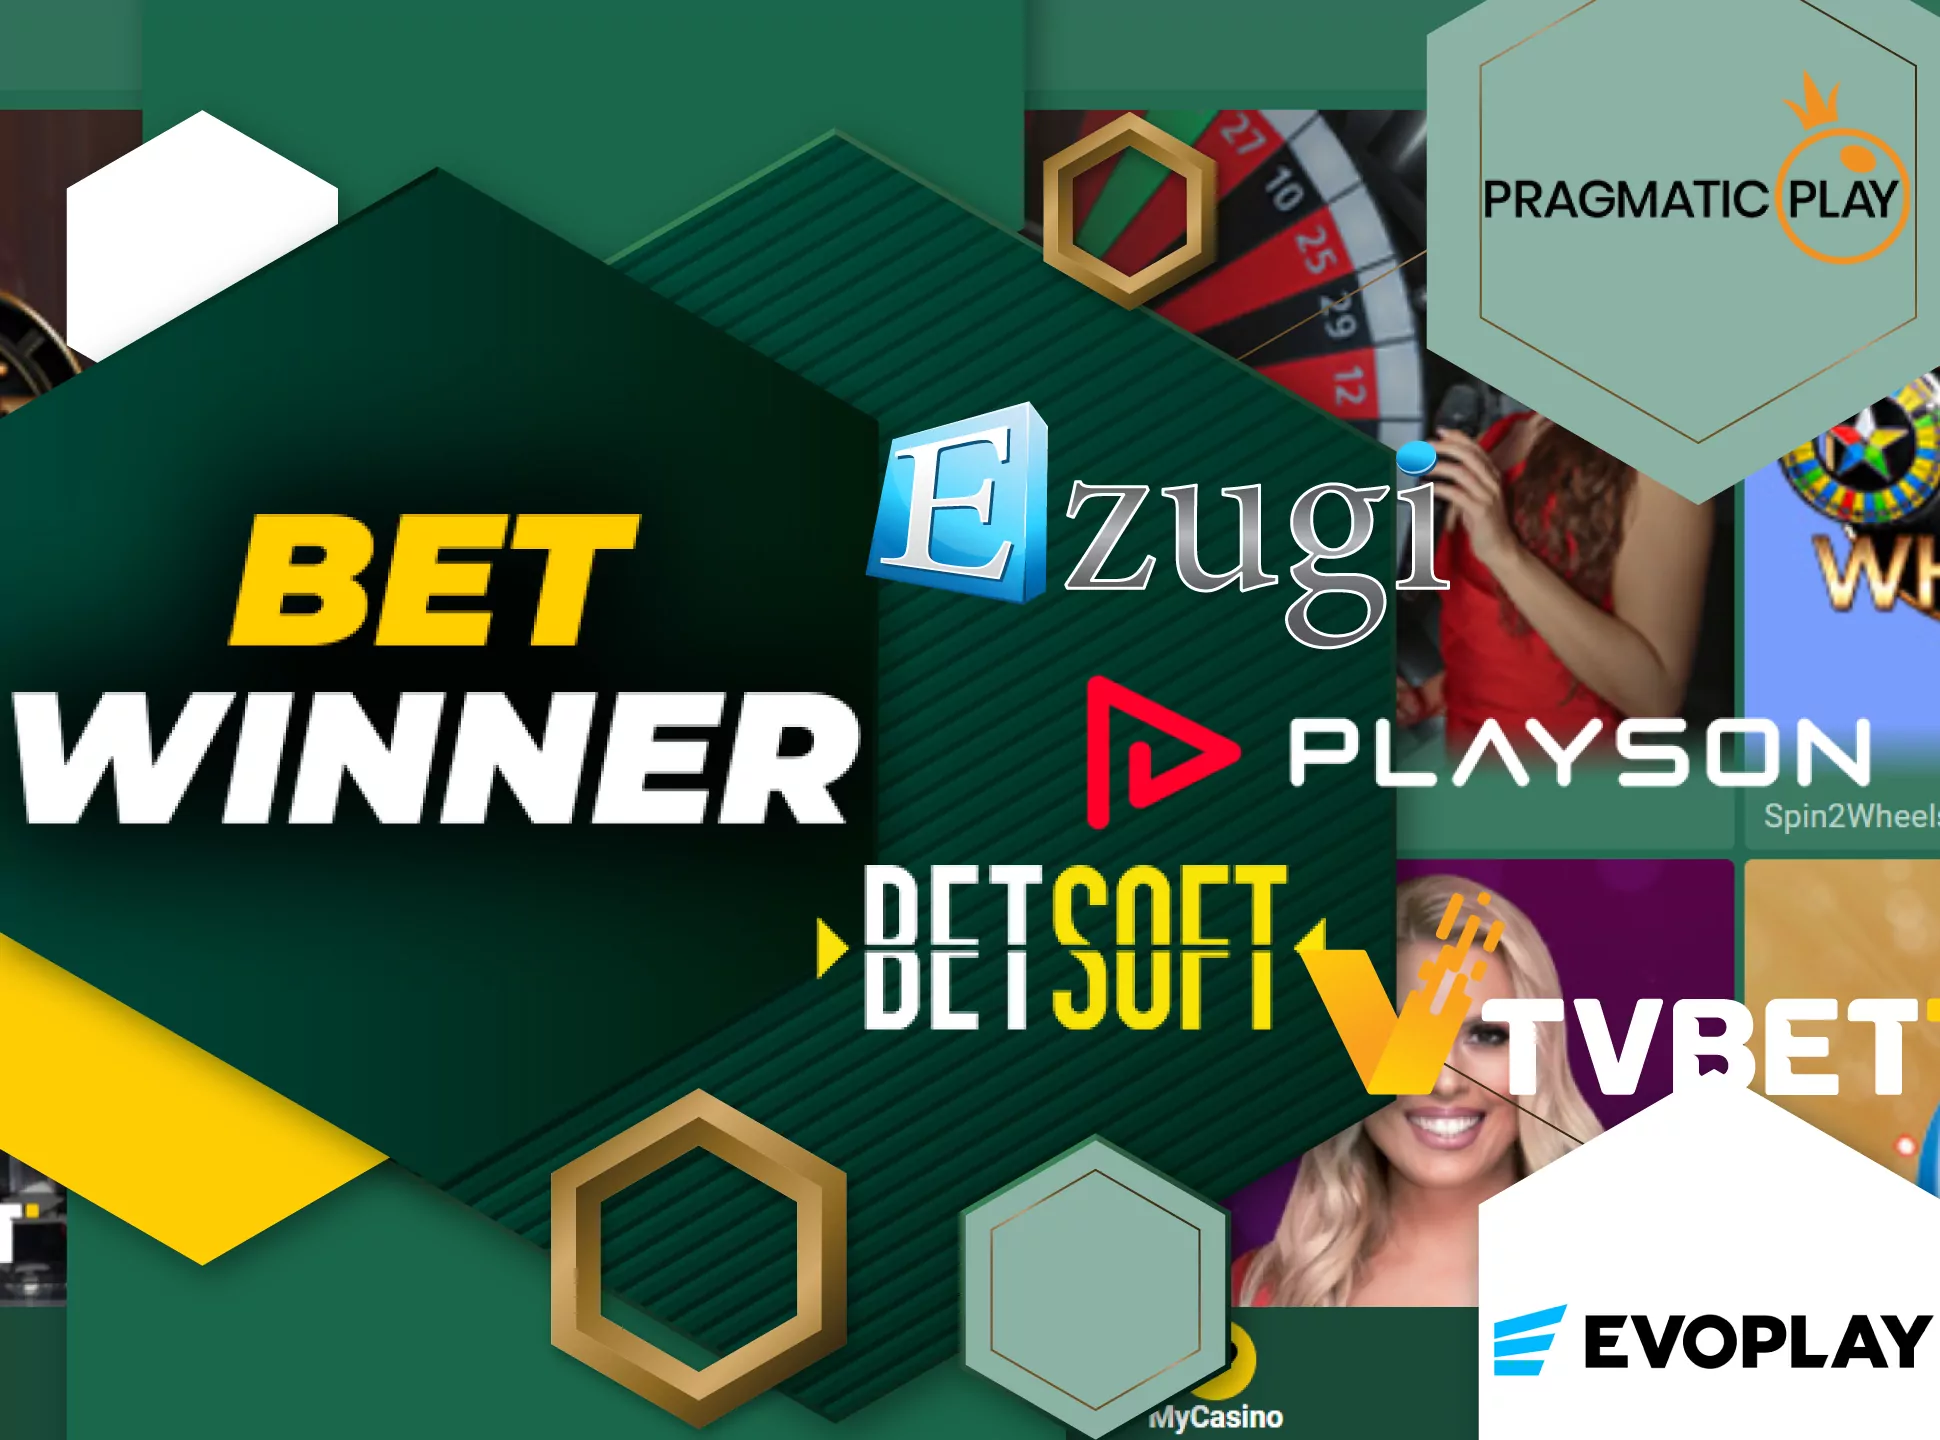 Betwinner has a lot of games from various games providers.